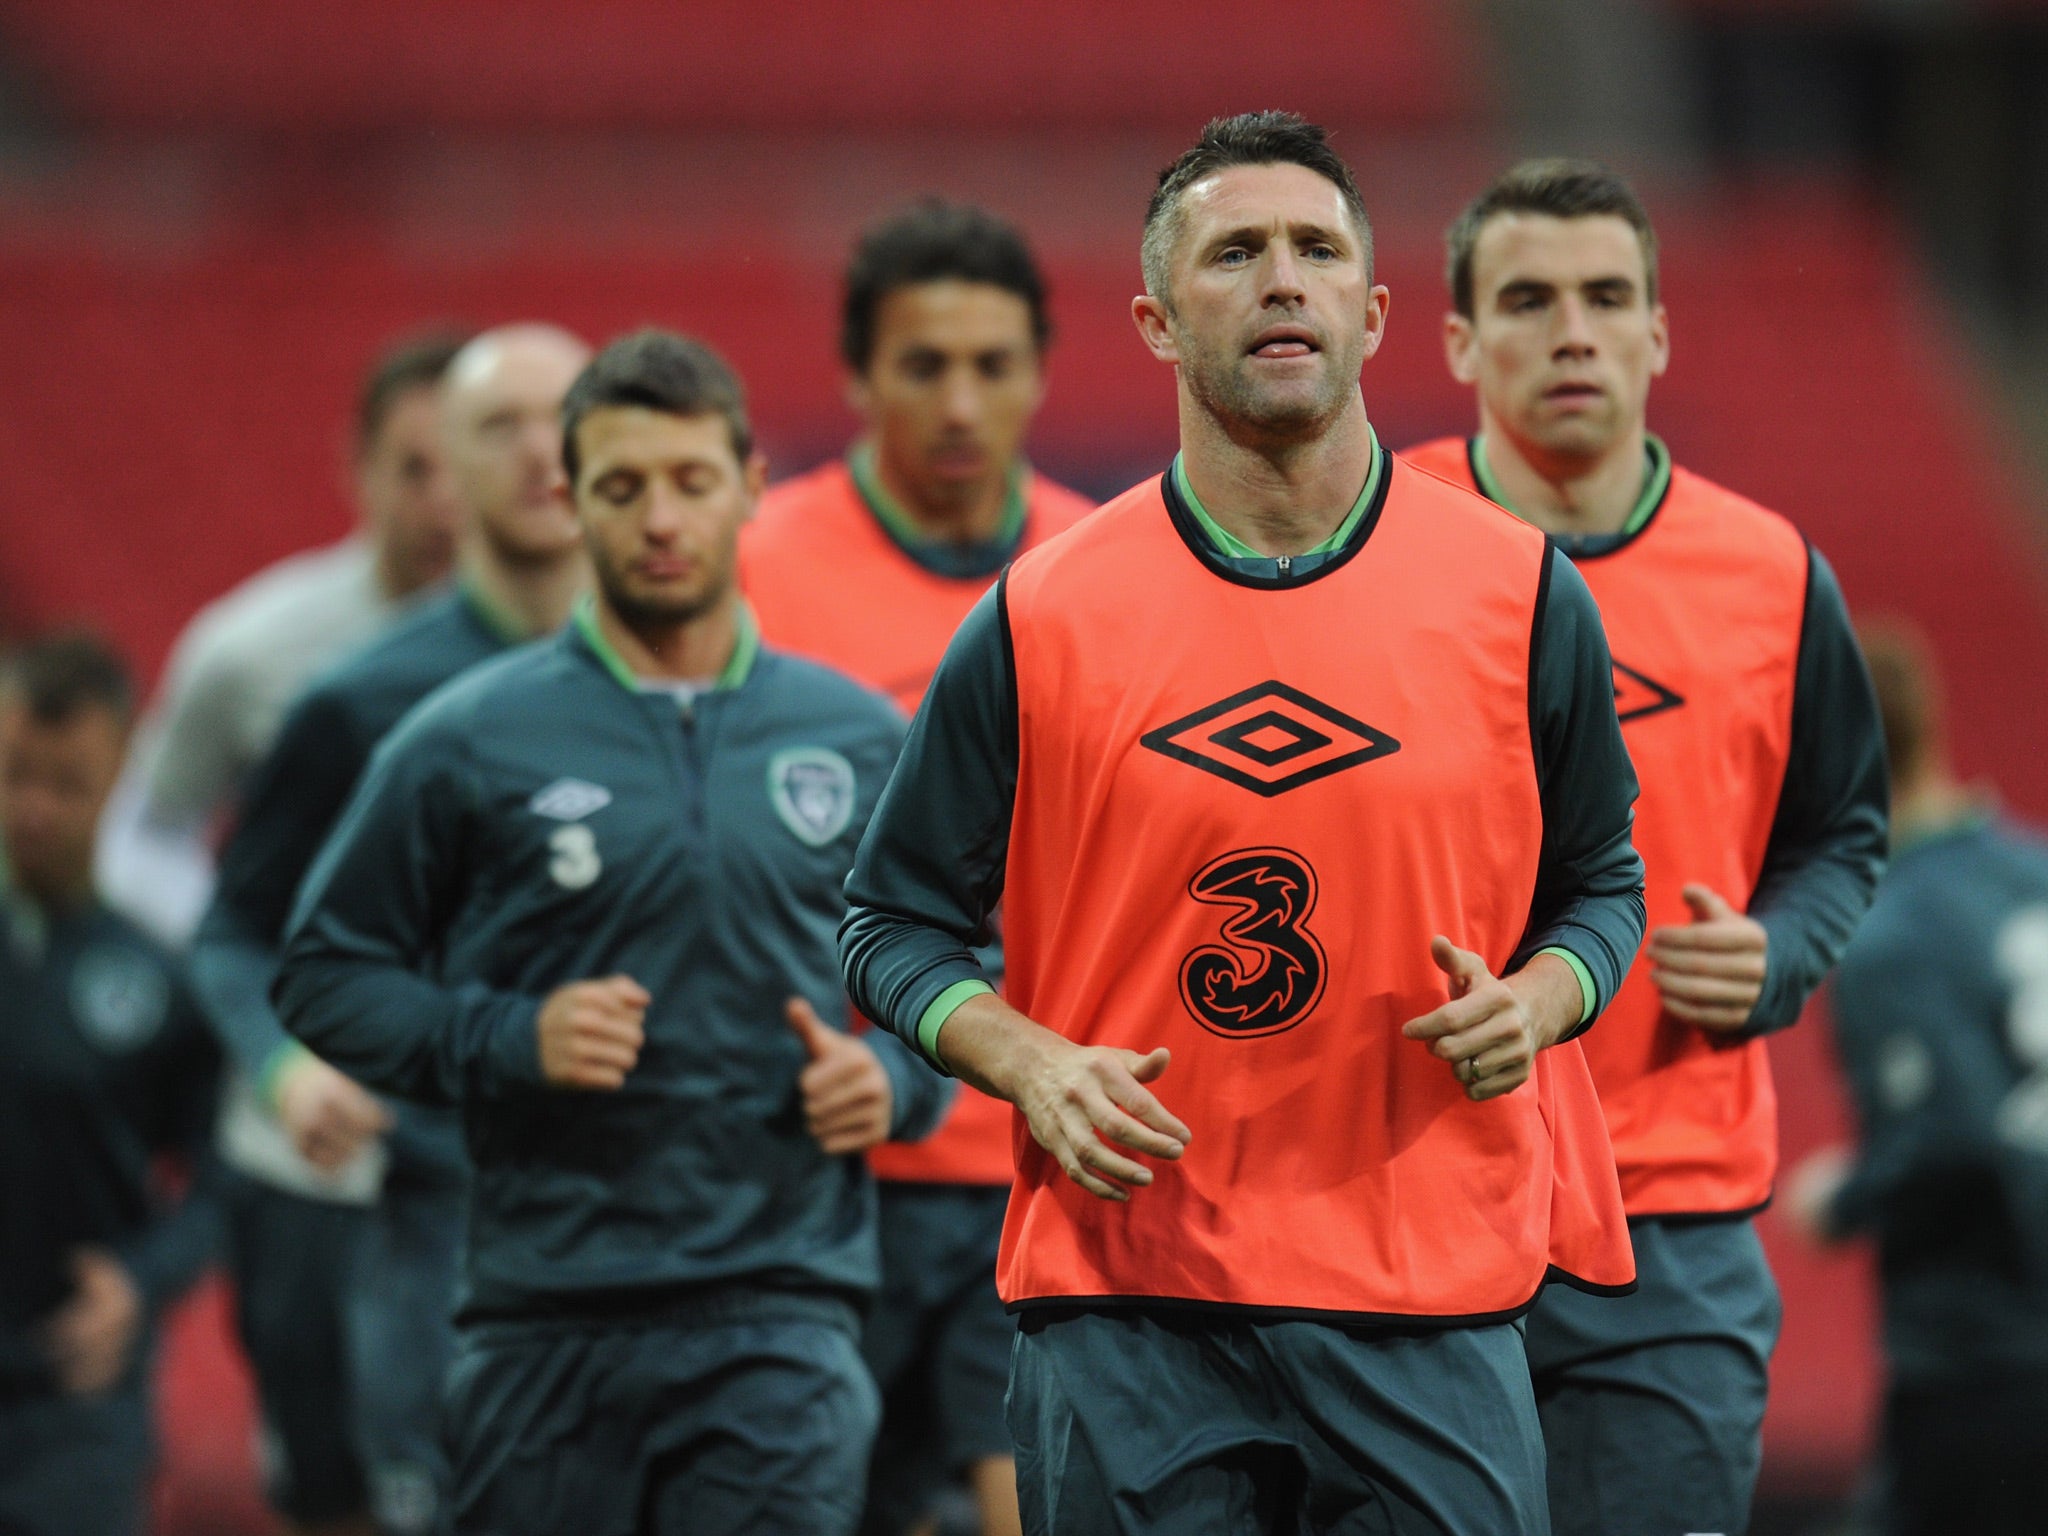 Robbie Keane pictures training at Wembley